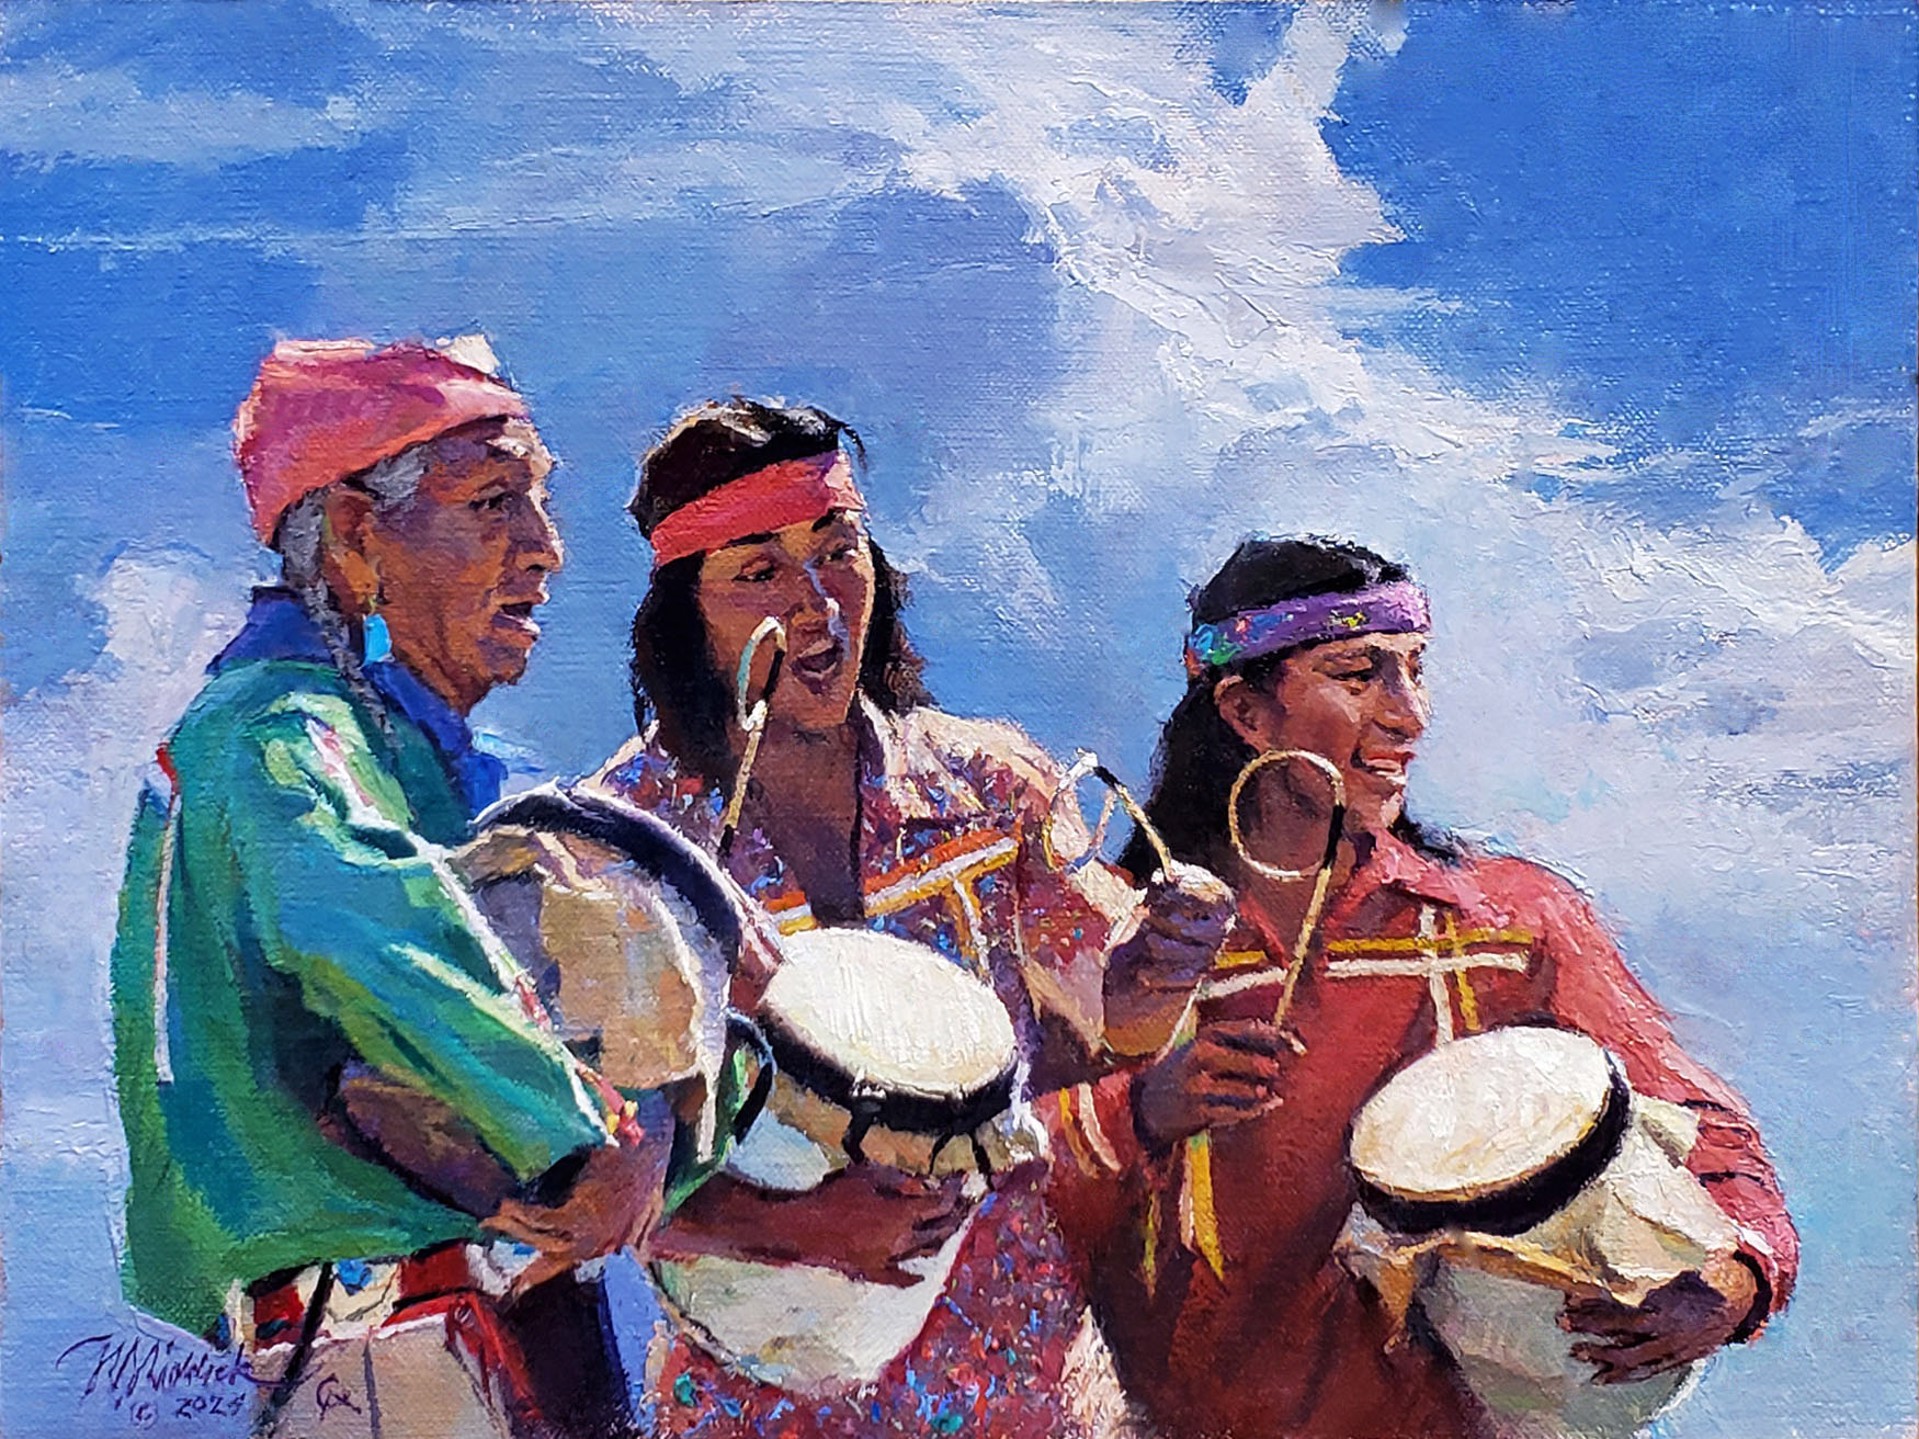 Ceremonial Drums by R. S. Riddick